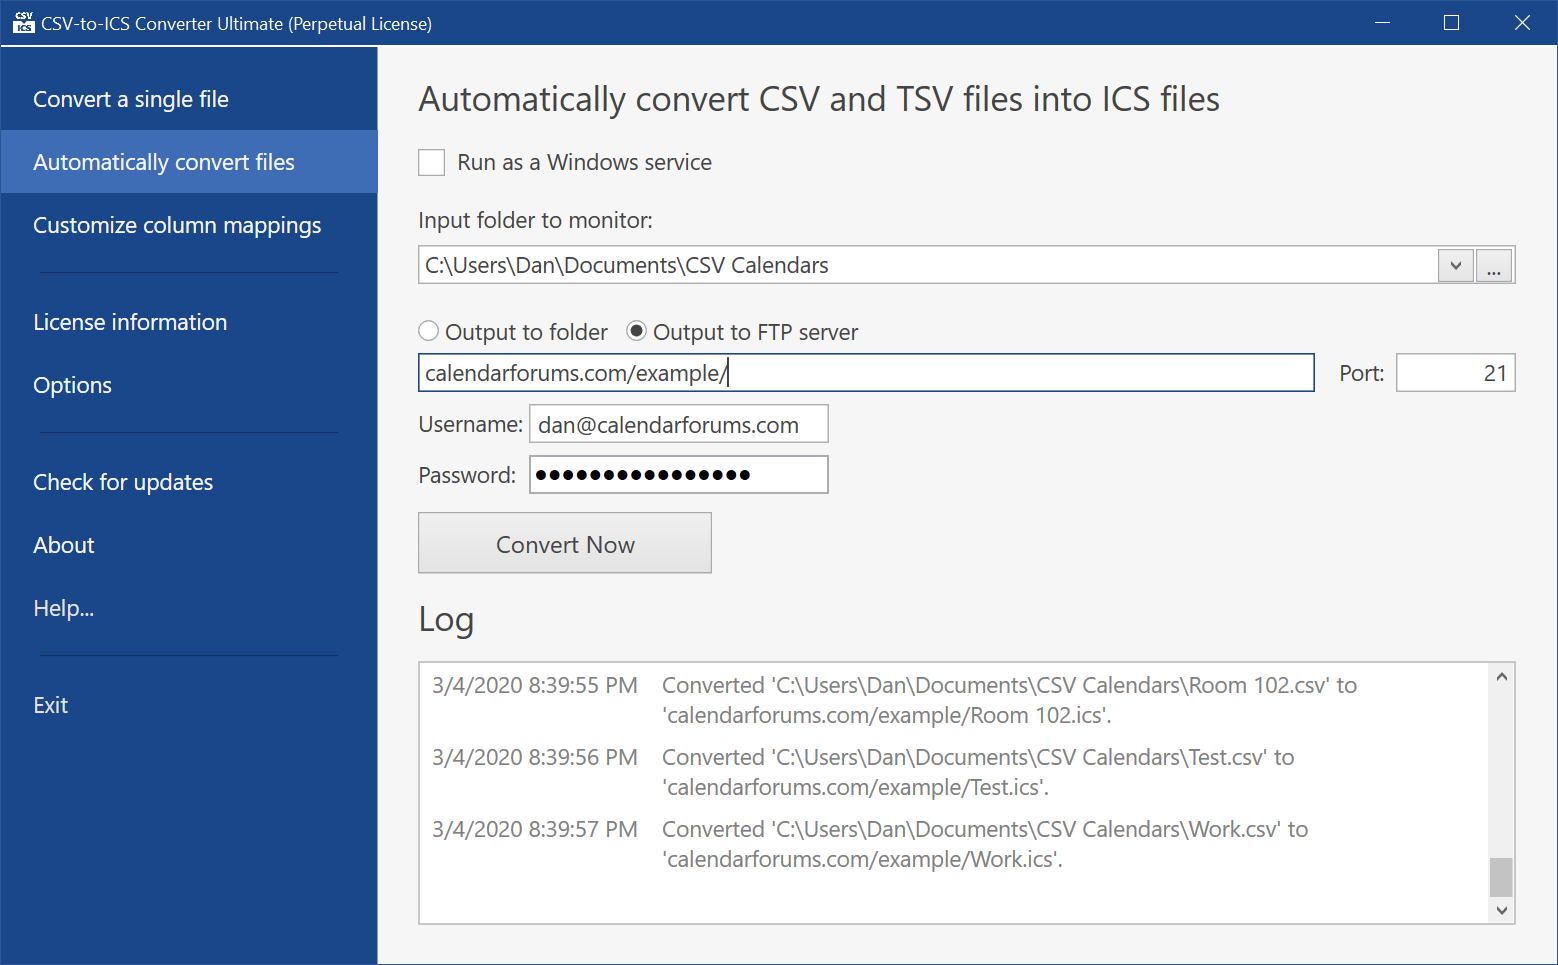 An FTP server can be specified. Whenever a CSV file is automatically converted into an ICS file, the generated ICS file will be uploaded to the specified FTP server.